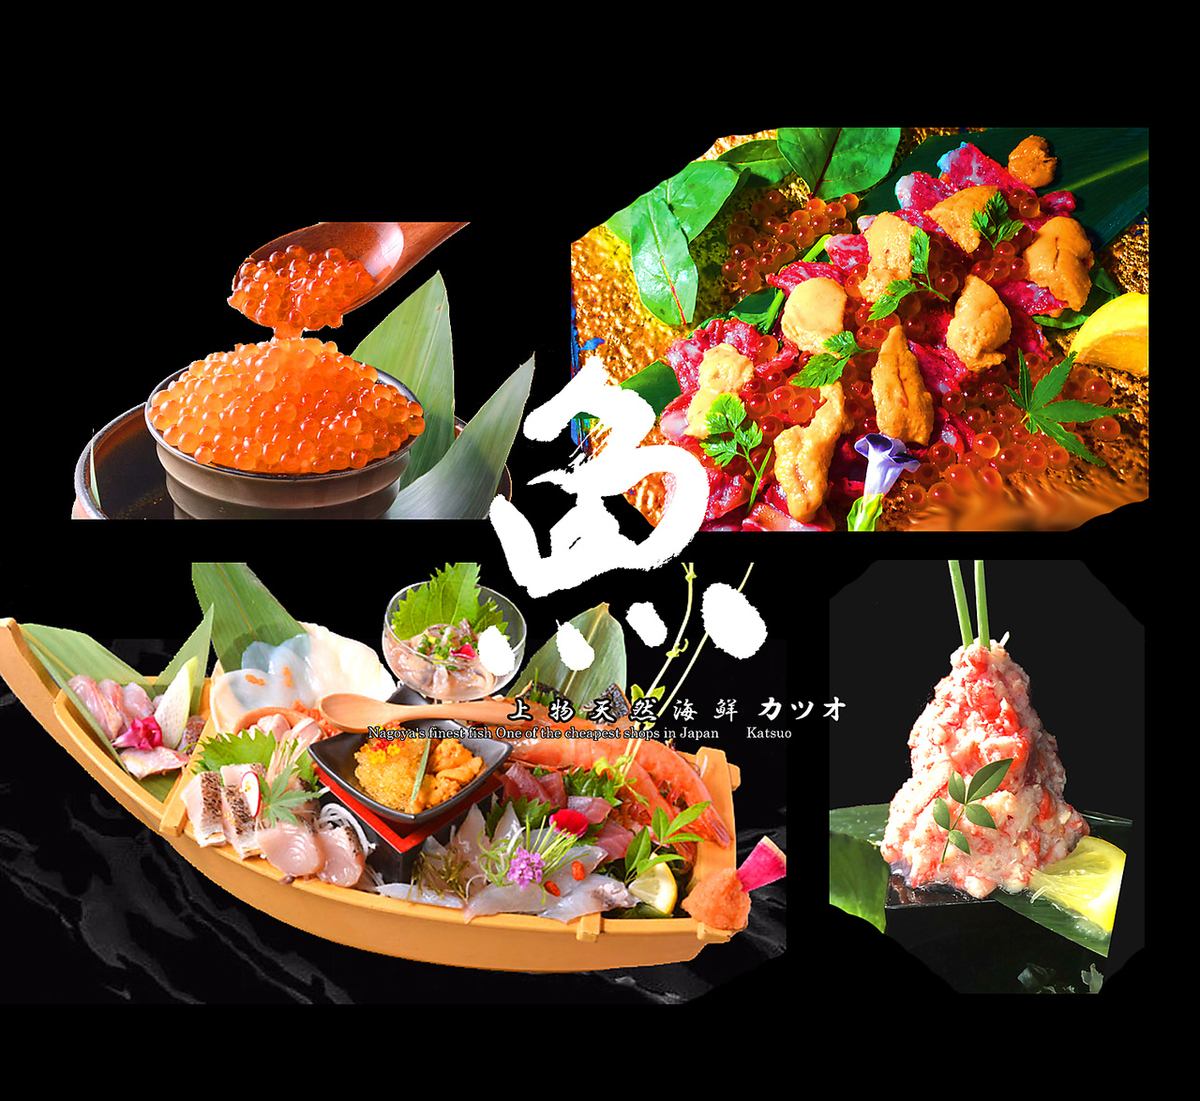 *Free tickets available for the secretary!! This is a gastronomy bar for high-end customers where the highest quality seafood is available at very low prices...